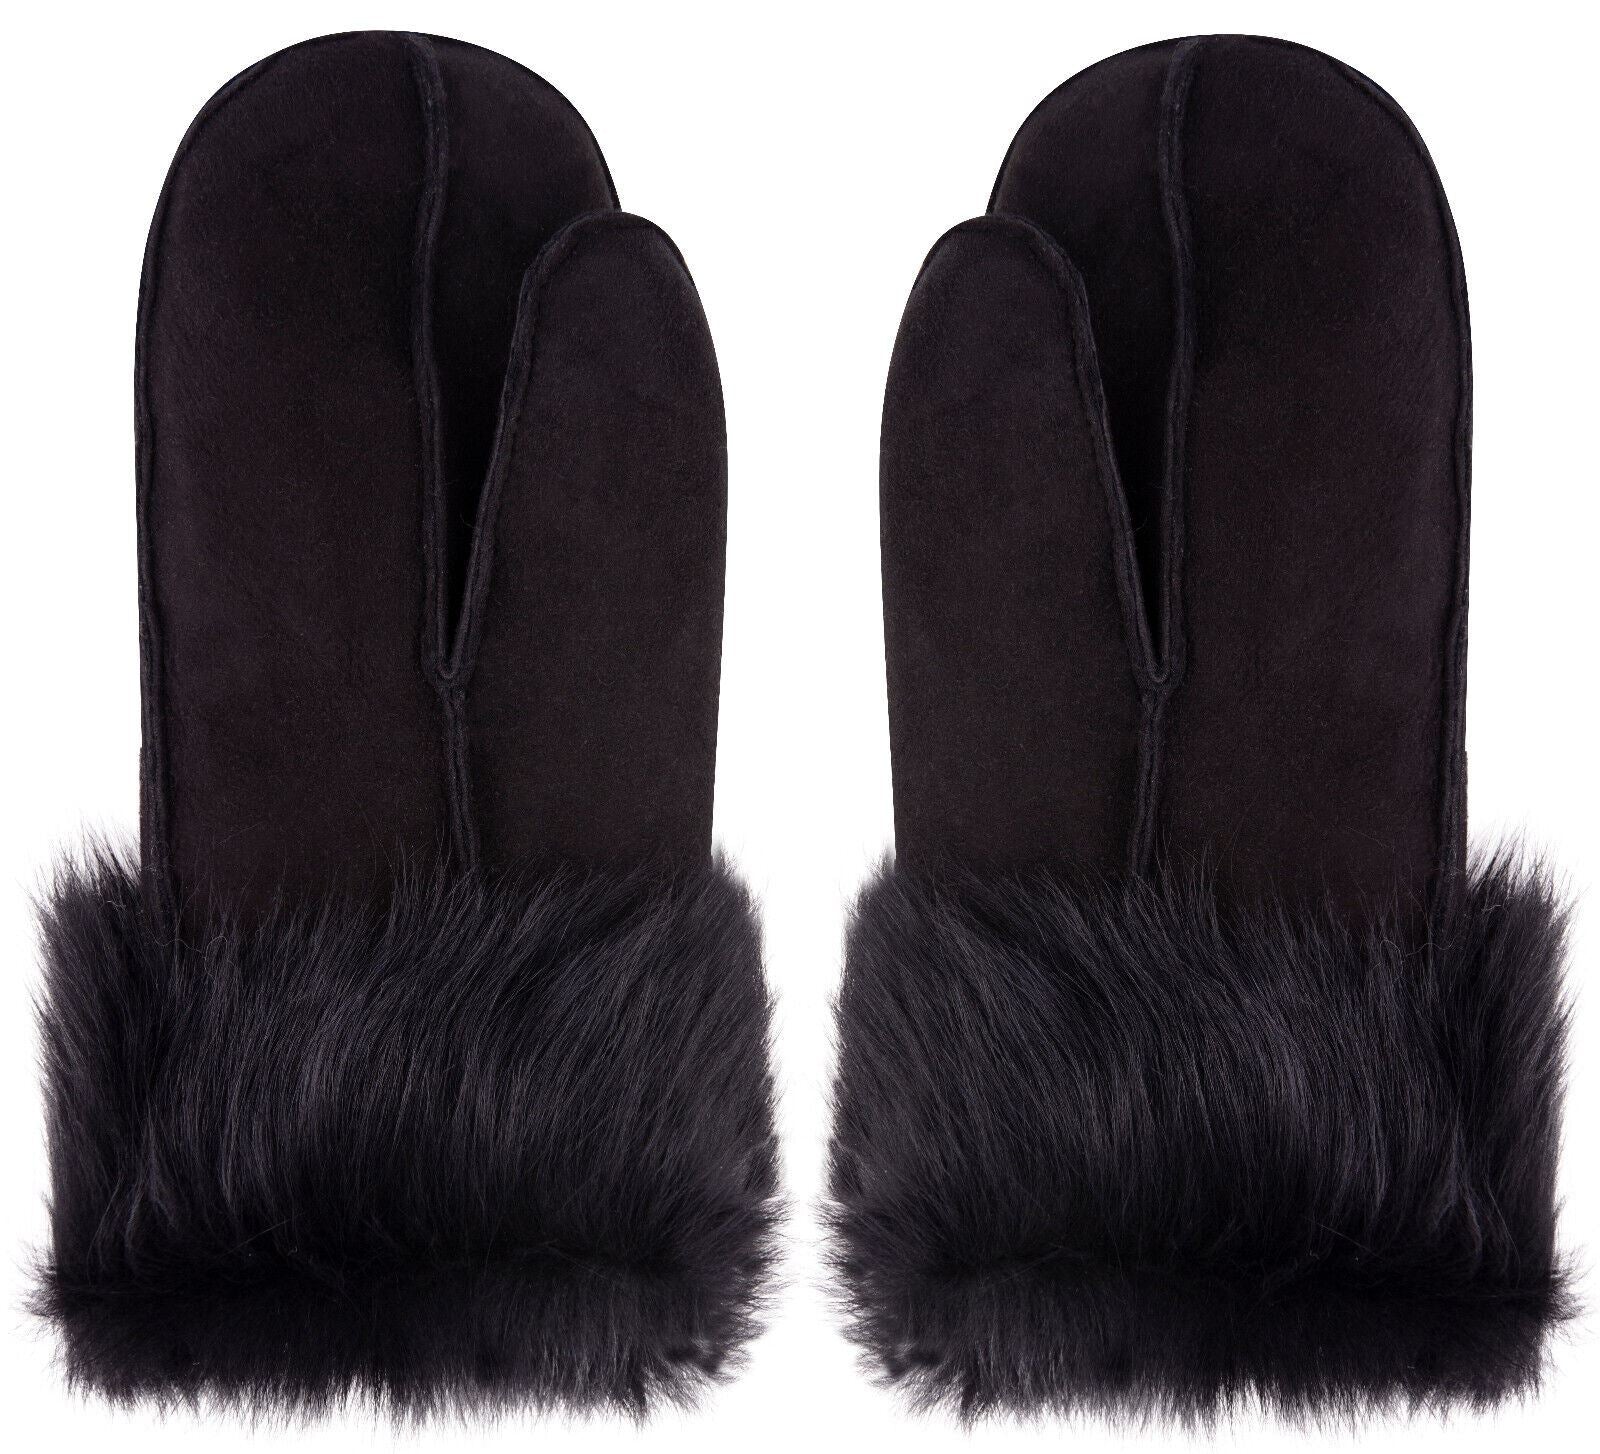 Handmade REAL LEATHER SHEEPSKIN MITTENS SHEARLING BLACK MITTS GLOVES THICK WARM